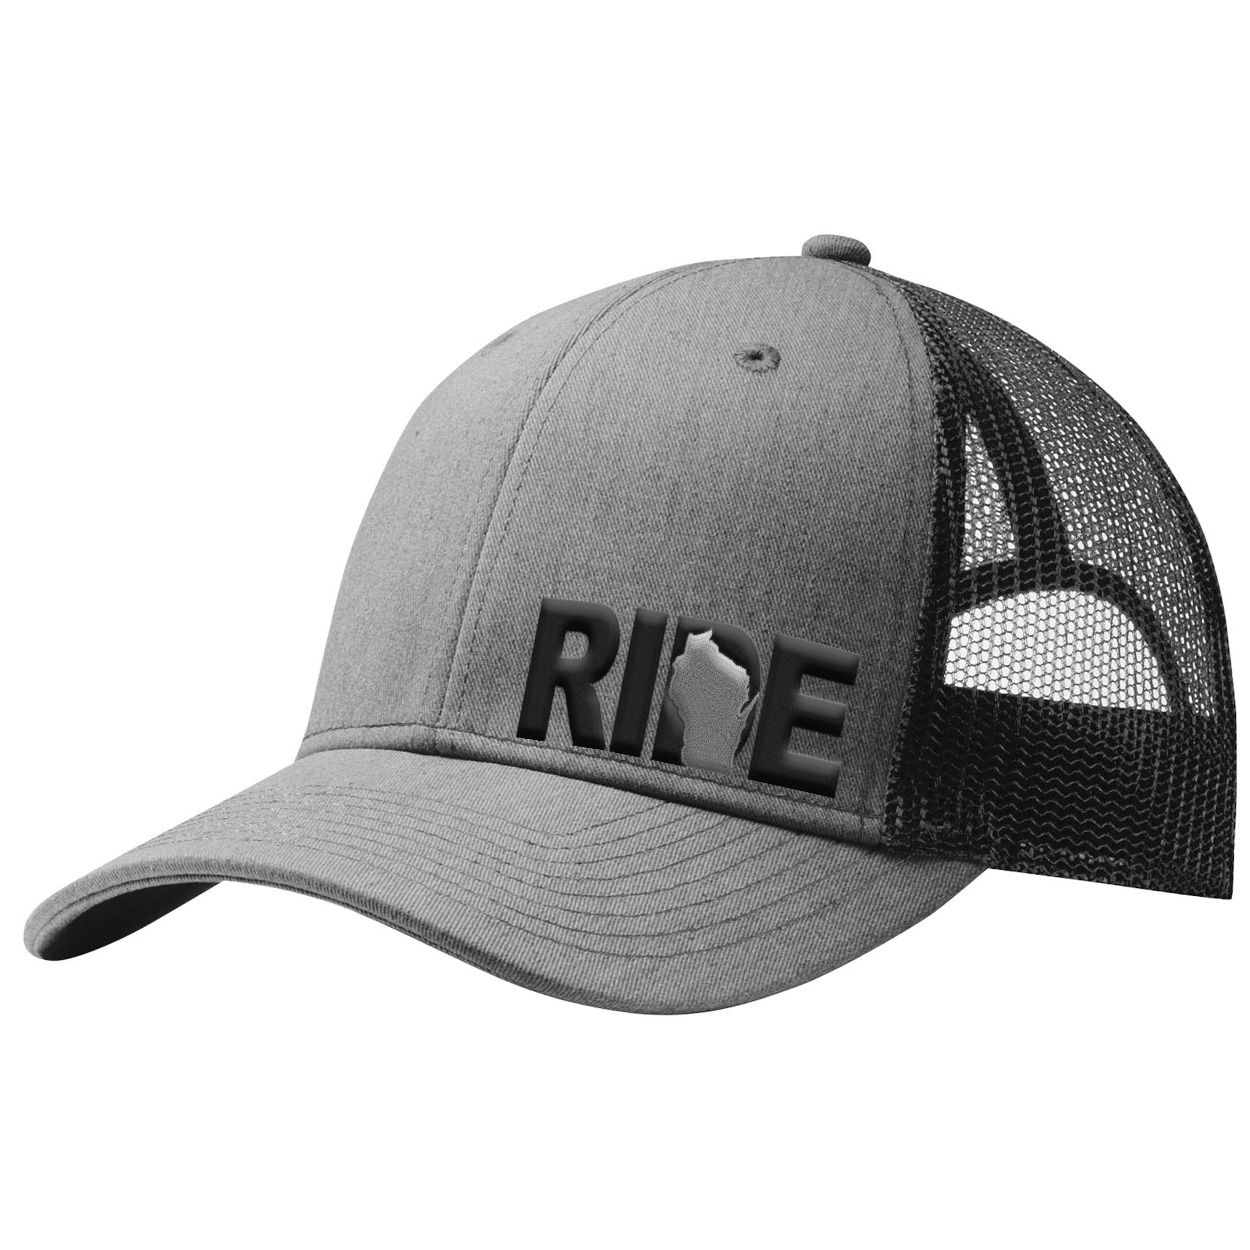 Ride Wisconsin Night Out Pro Embroidered Snapback Trucker Hat Heather Gray/Black